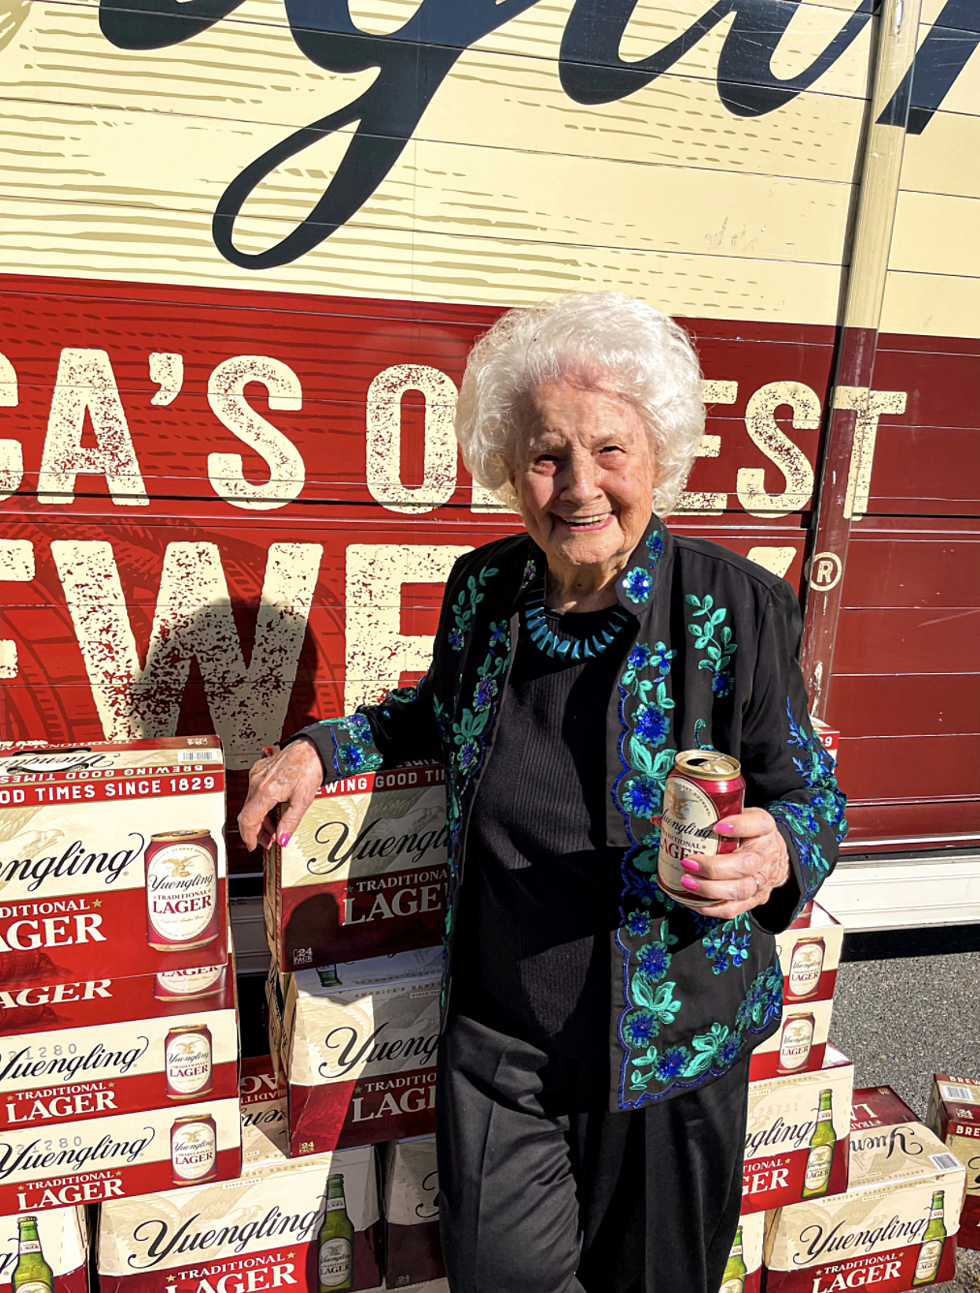 106 Year Old Woman from Pennsylvania Got a Truckload of Beer from Yuengling